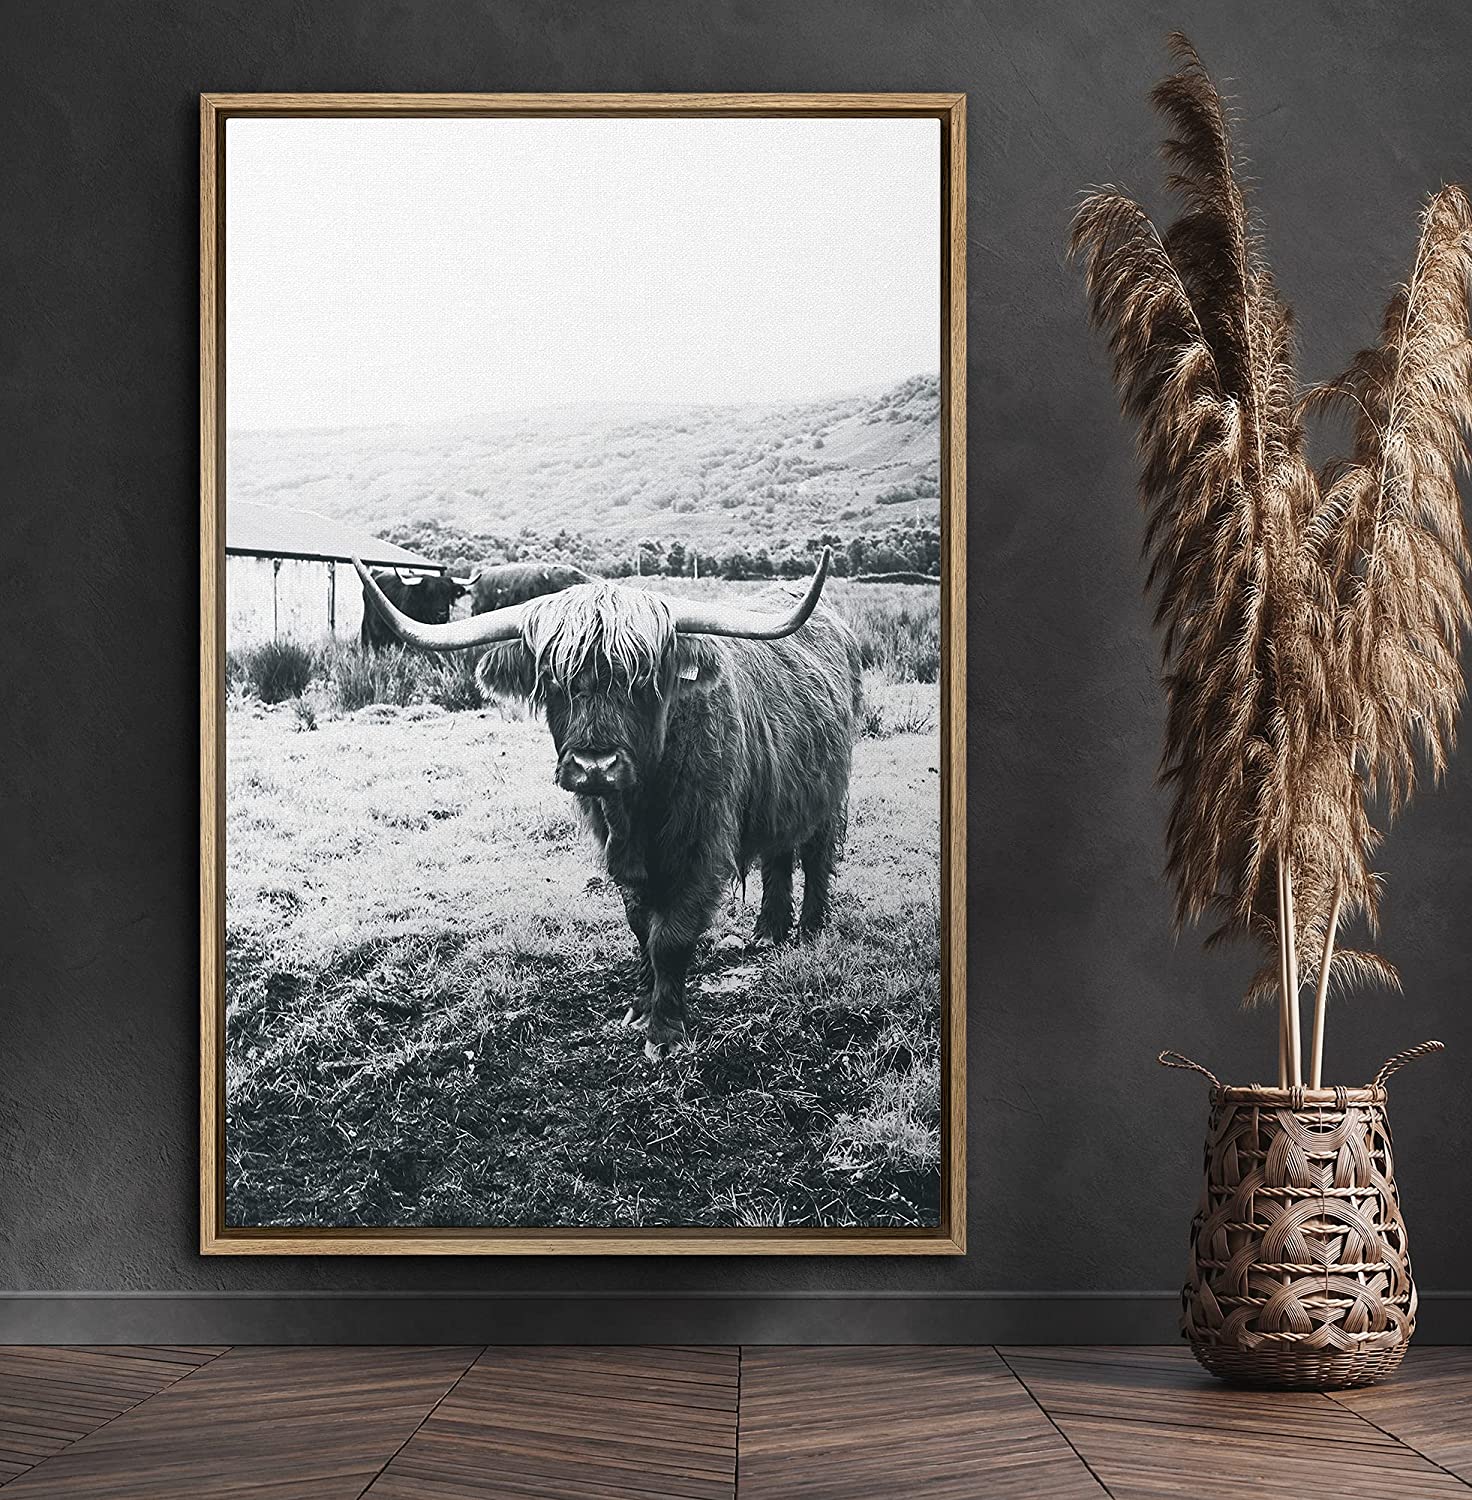 PixonSign Highland Cow Canvas Print Framed Wall Art, 24x36 inches